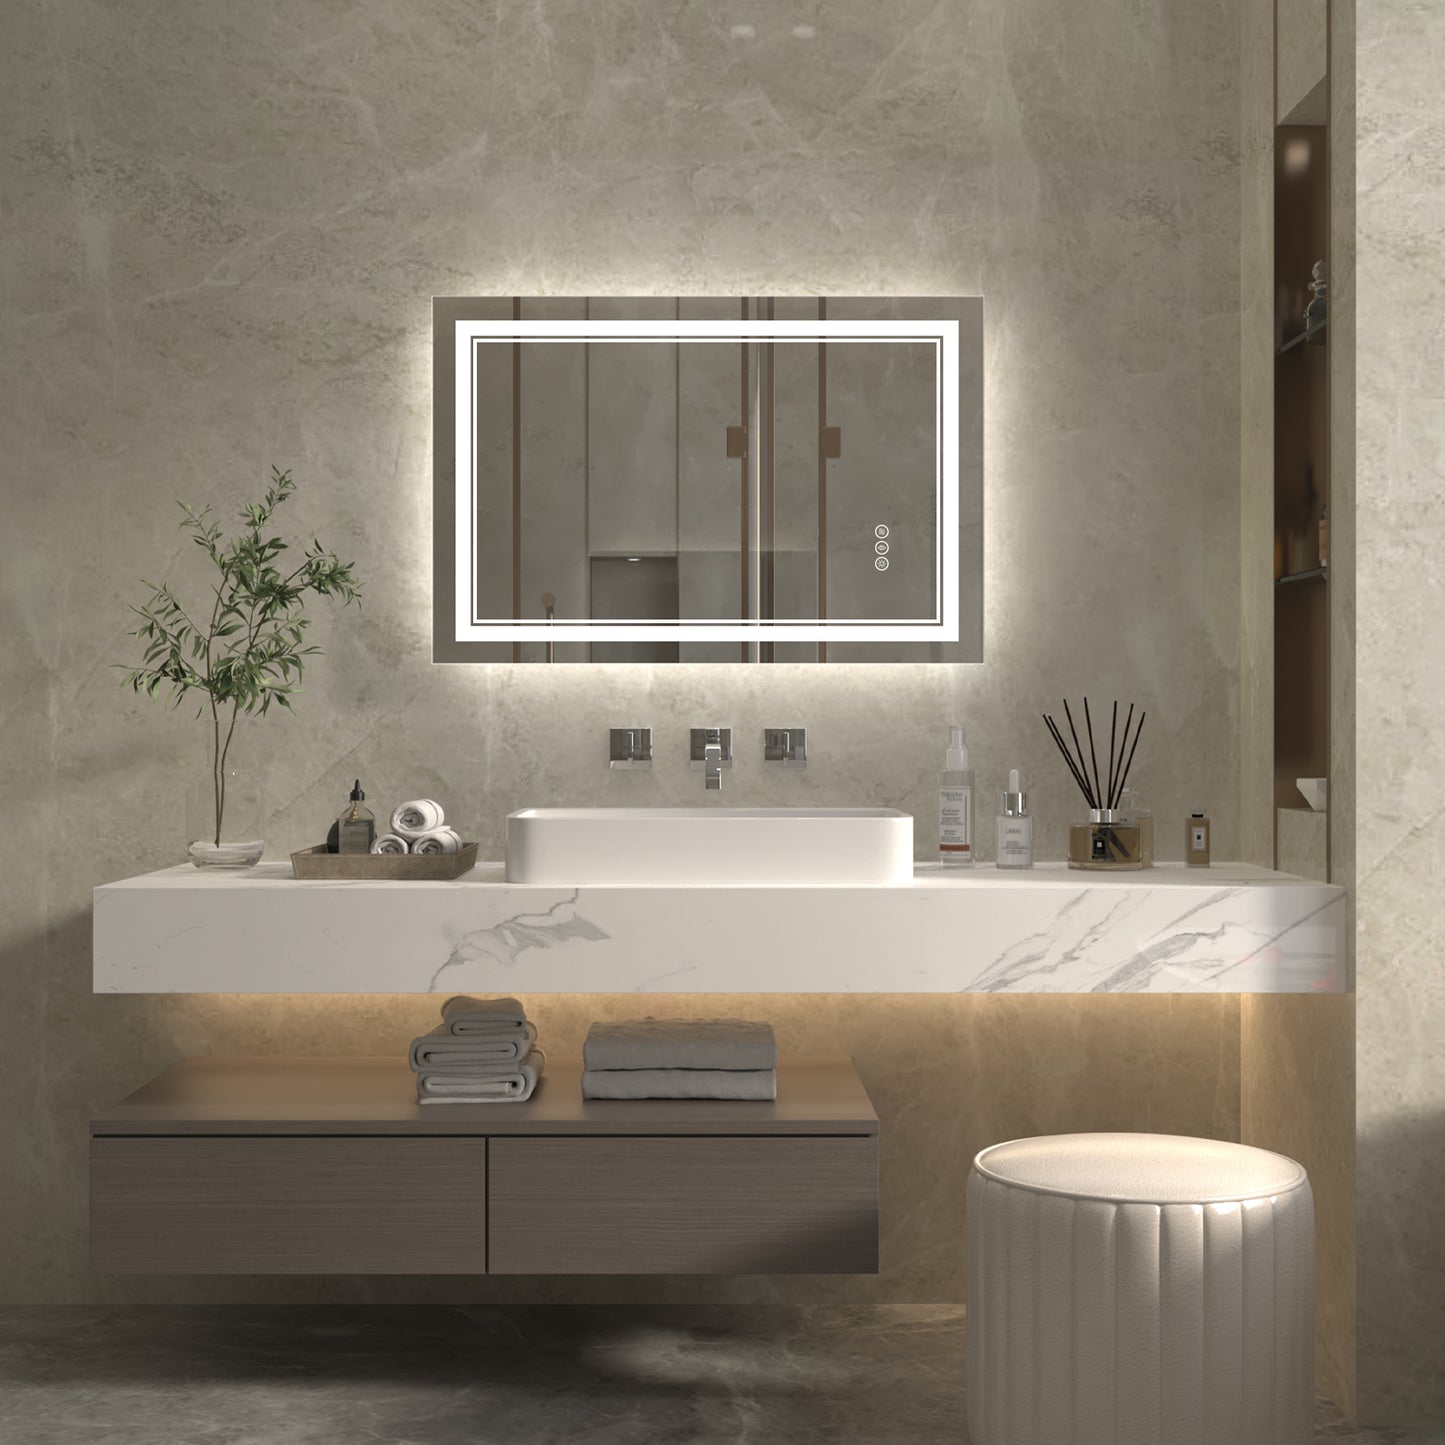 Linea 24" W x 36" H LED Heated Bathroom Mirror,Anti Fog,Dimmable,Front-Lighted and Backlit, Tempered Glass